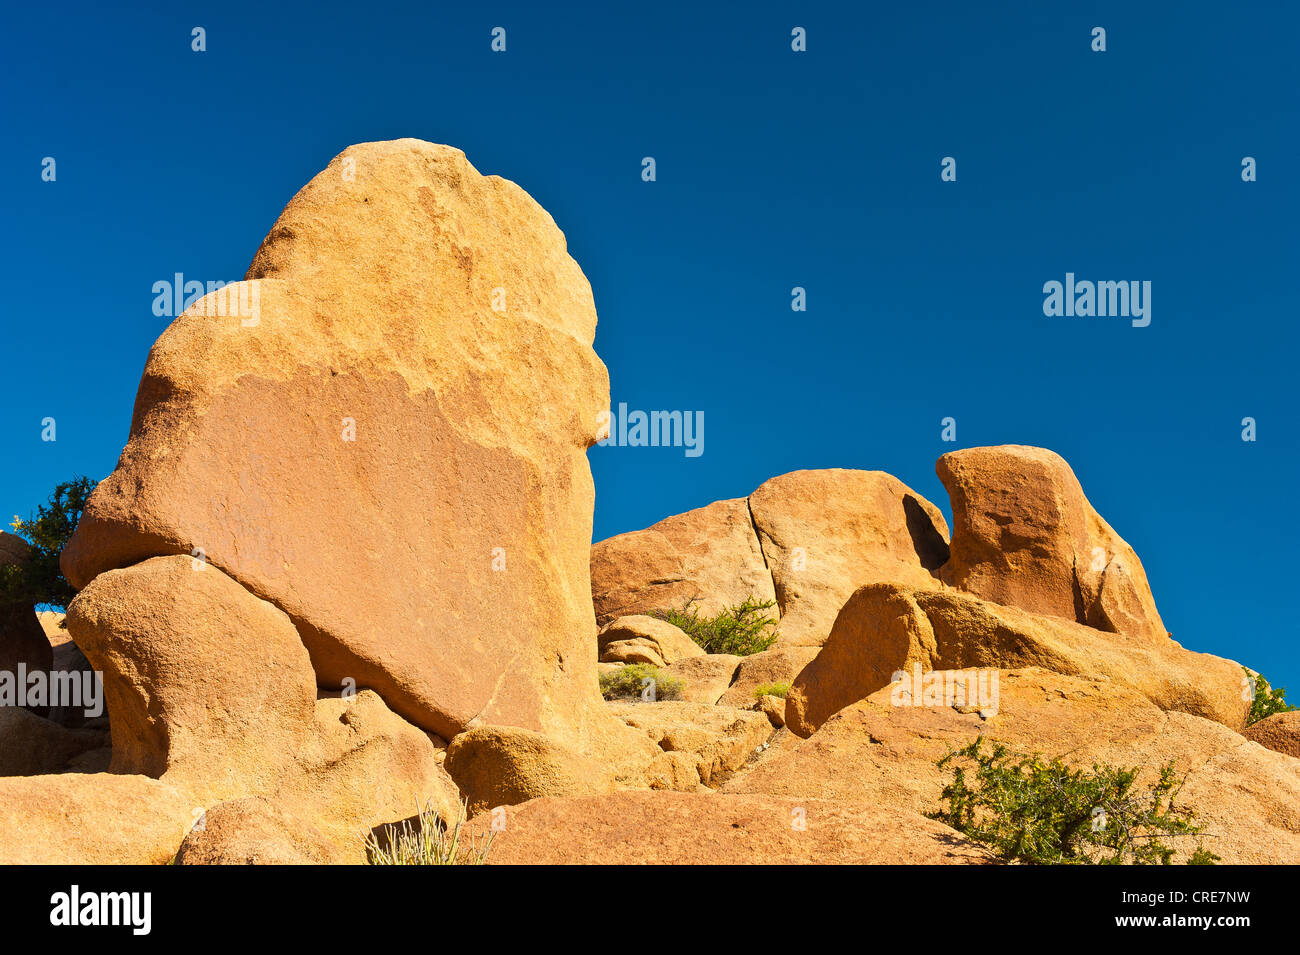 Granite boulders lying on a rocky outcrop in the Anti-Atlas Mountains, southern Morocco, Morocco, Africa Stock Photo